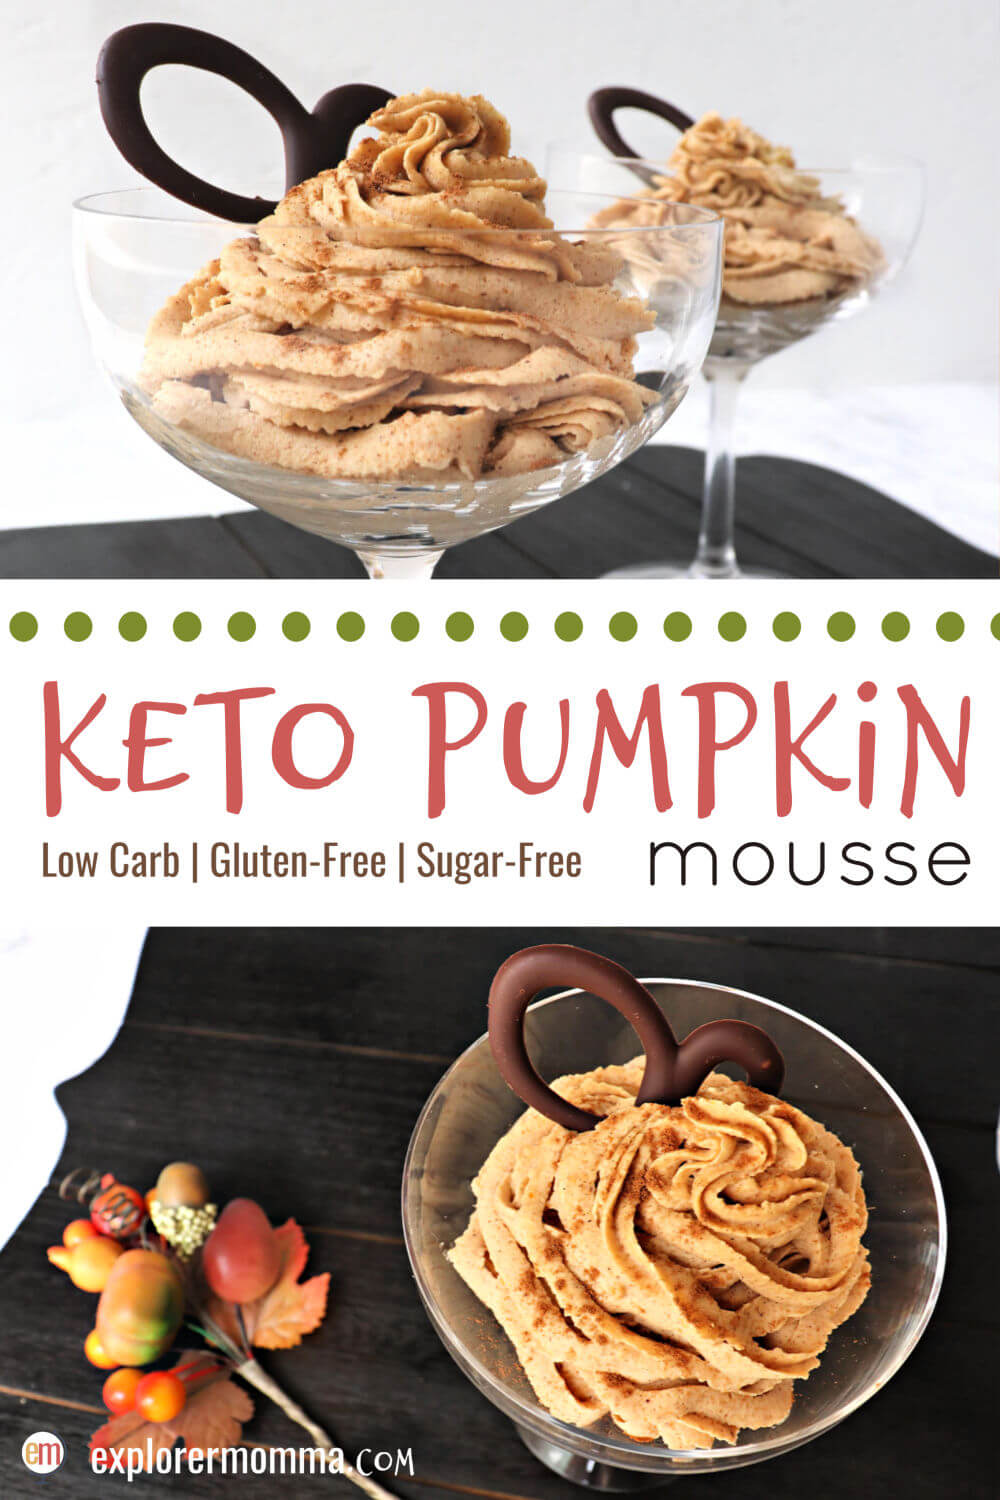 Quick and easy whipped keto pumpkin mousse is decadent low carb delight! Creamy mascarpone cheese, cream, pumpkin, and spices make this a pumpkin pie in a mousse. A sugar-free fall recipe everyone will love. #ketodessert #lowcarbpumpkinspice #pumpkinspice